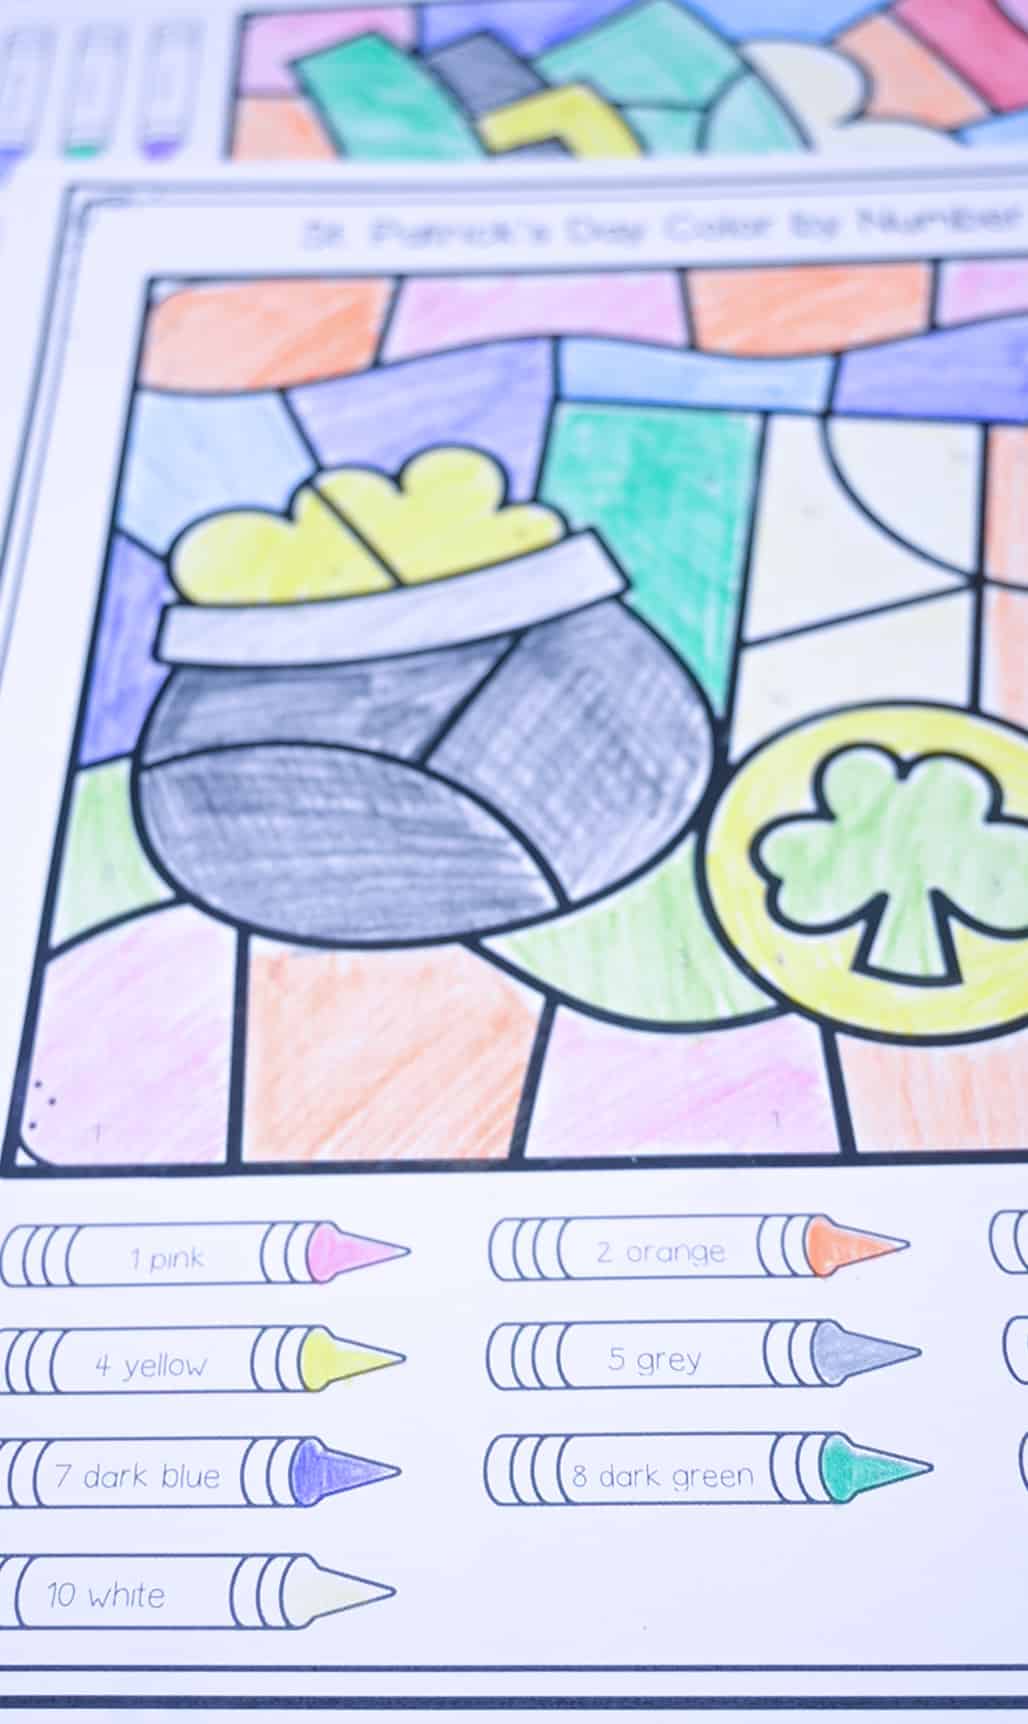 a photo of crayons colored on a St. Patrick's Day color by number page to create a key for children